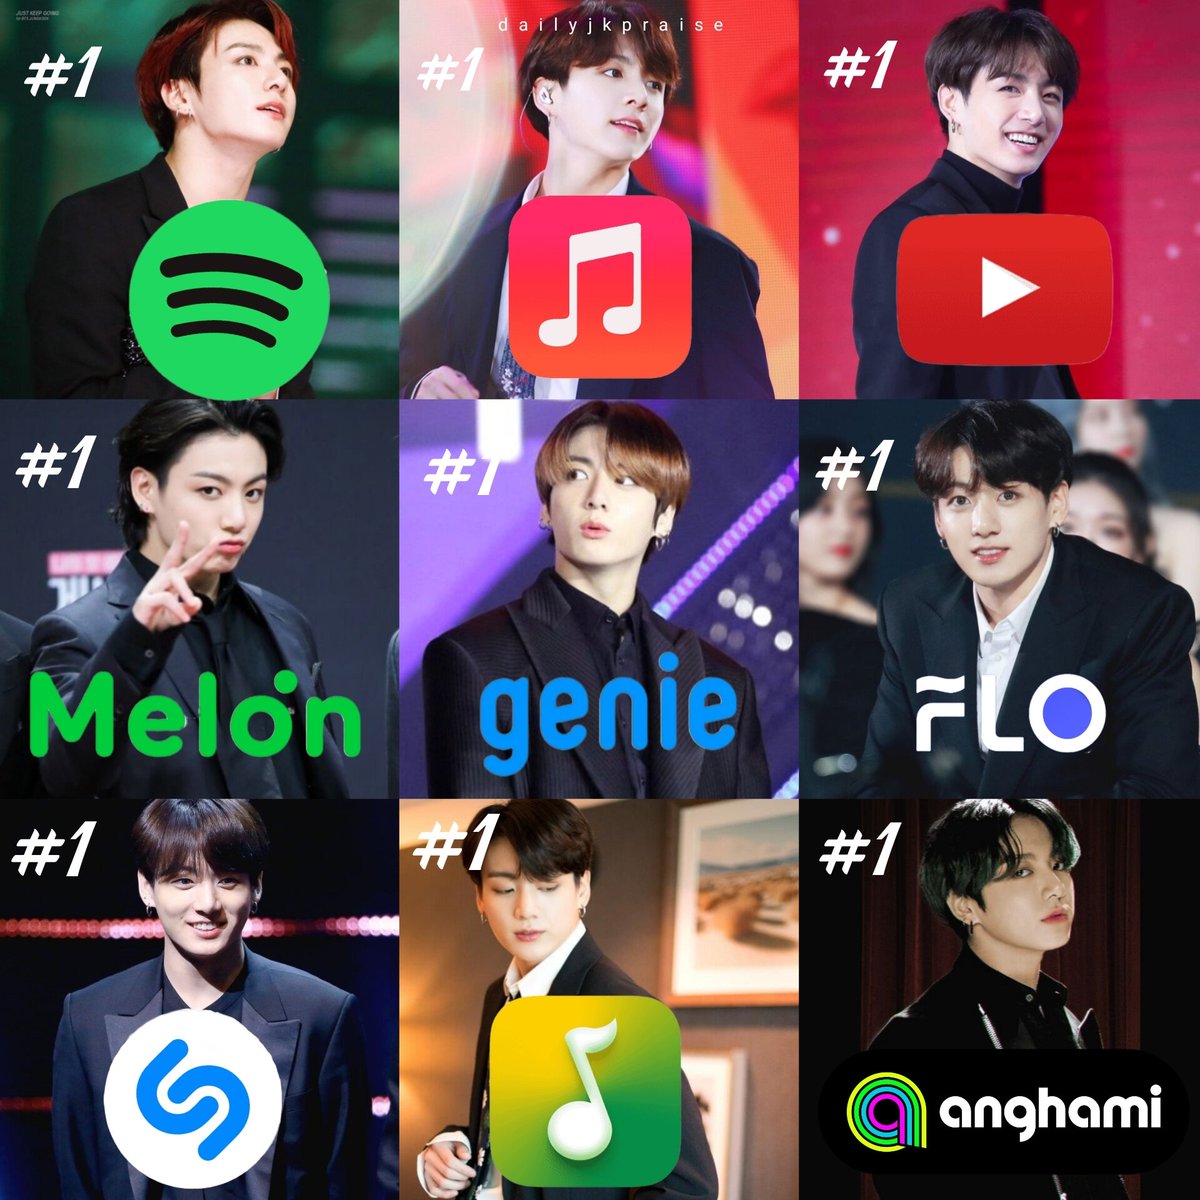 #JUNGKOOK is the Most Streamed BTS member on Spotify, AM, YouTube, MelOn, Genie, Flo, Shazam, QQ Music (🇨🇳) and Anghami in Solo era.